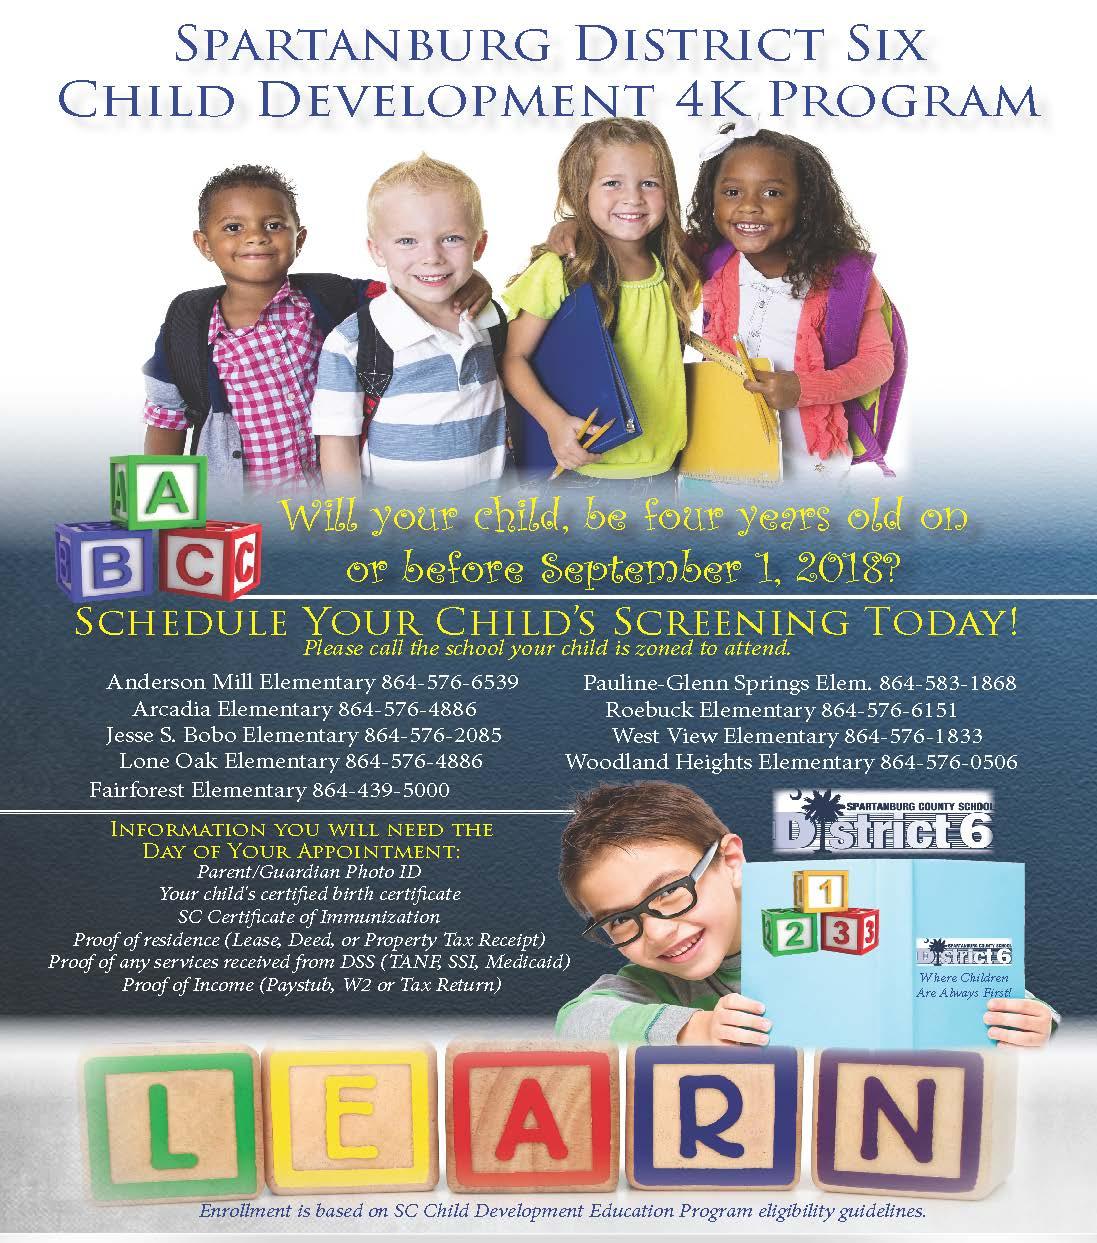 Flyer with pictures of kids. Flyer states will your child be four years old before September 1, 2018. If so then call the school the child is zoned for and schedule a 4k screening. 